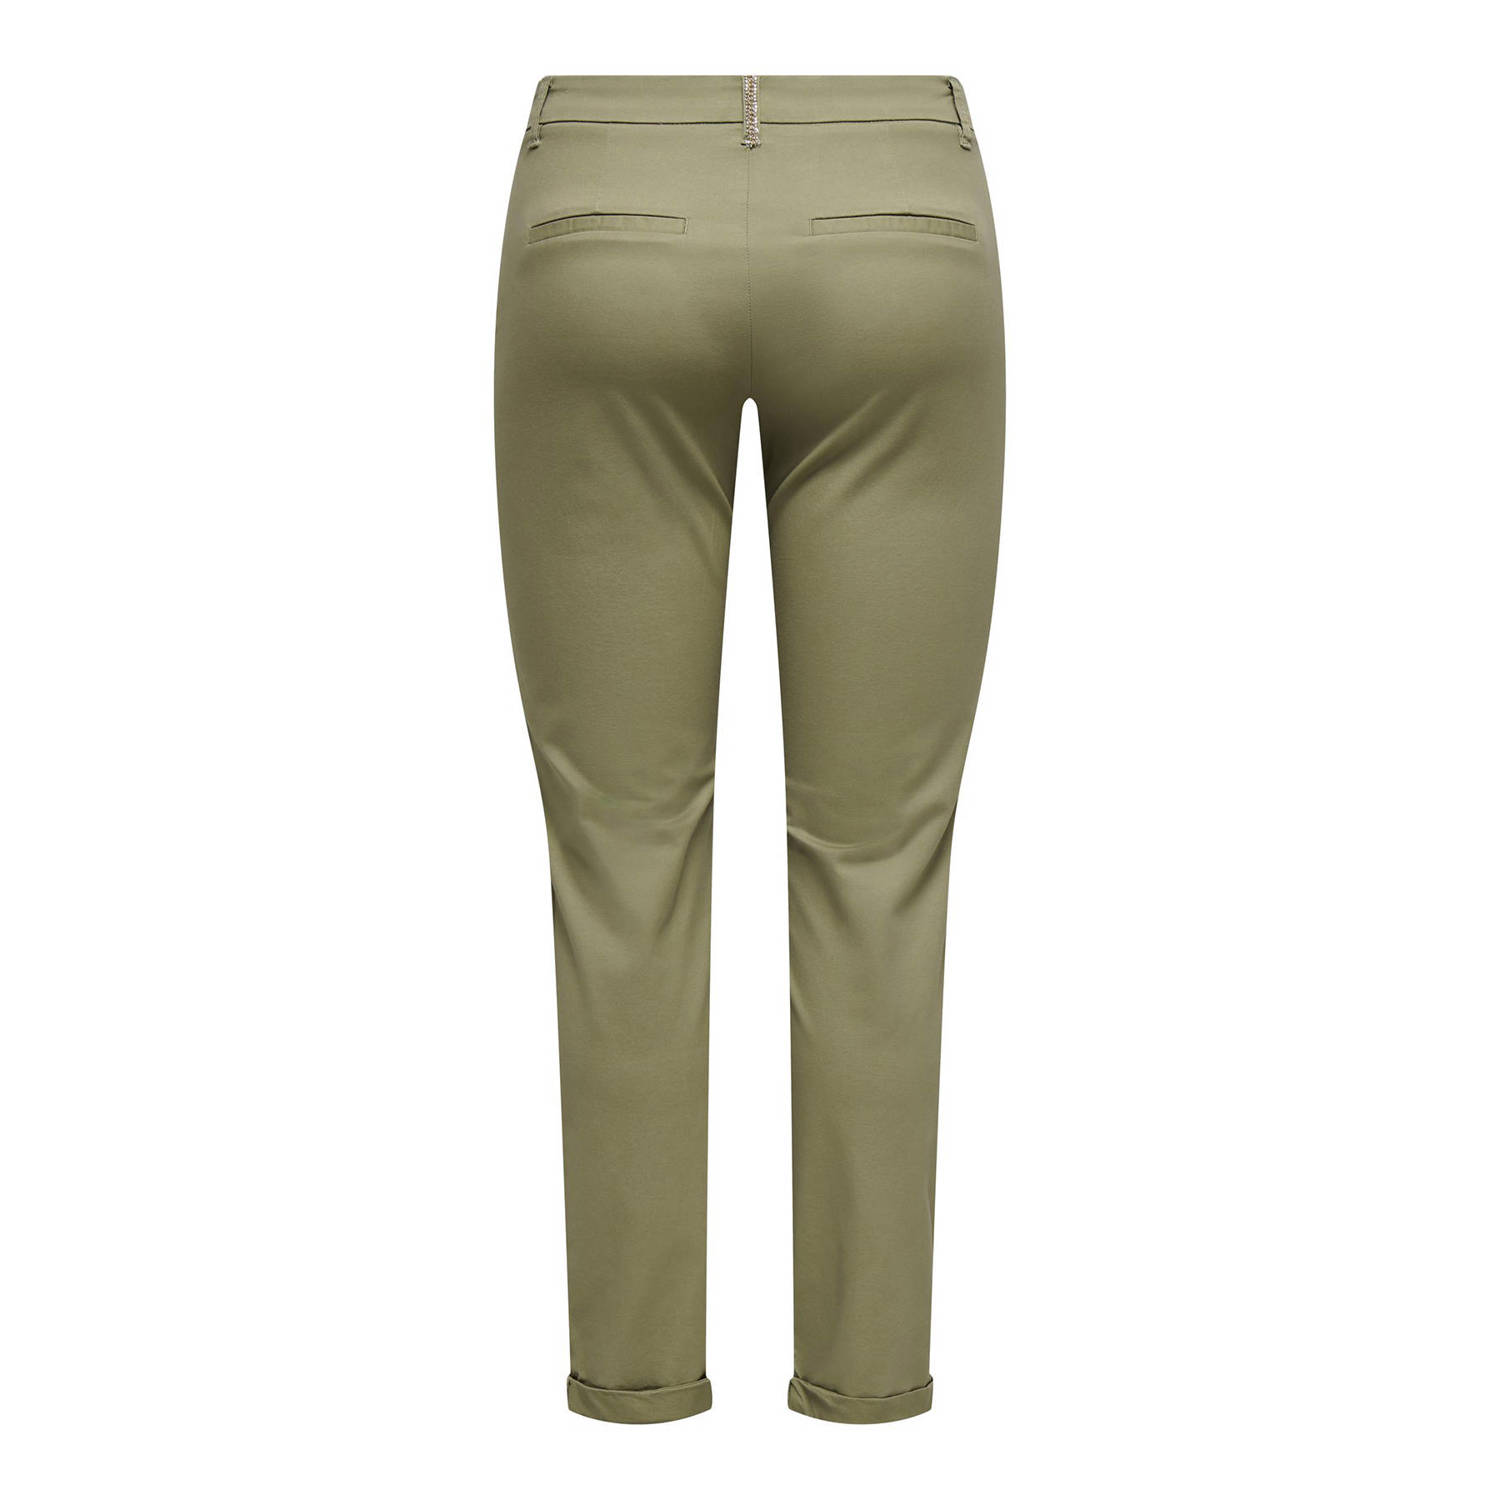 ONLY regular fit chino ONLBIANA beige